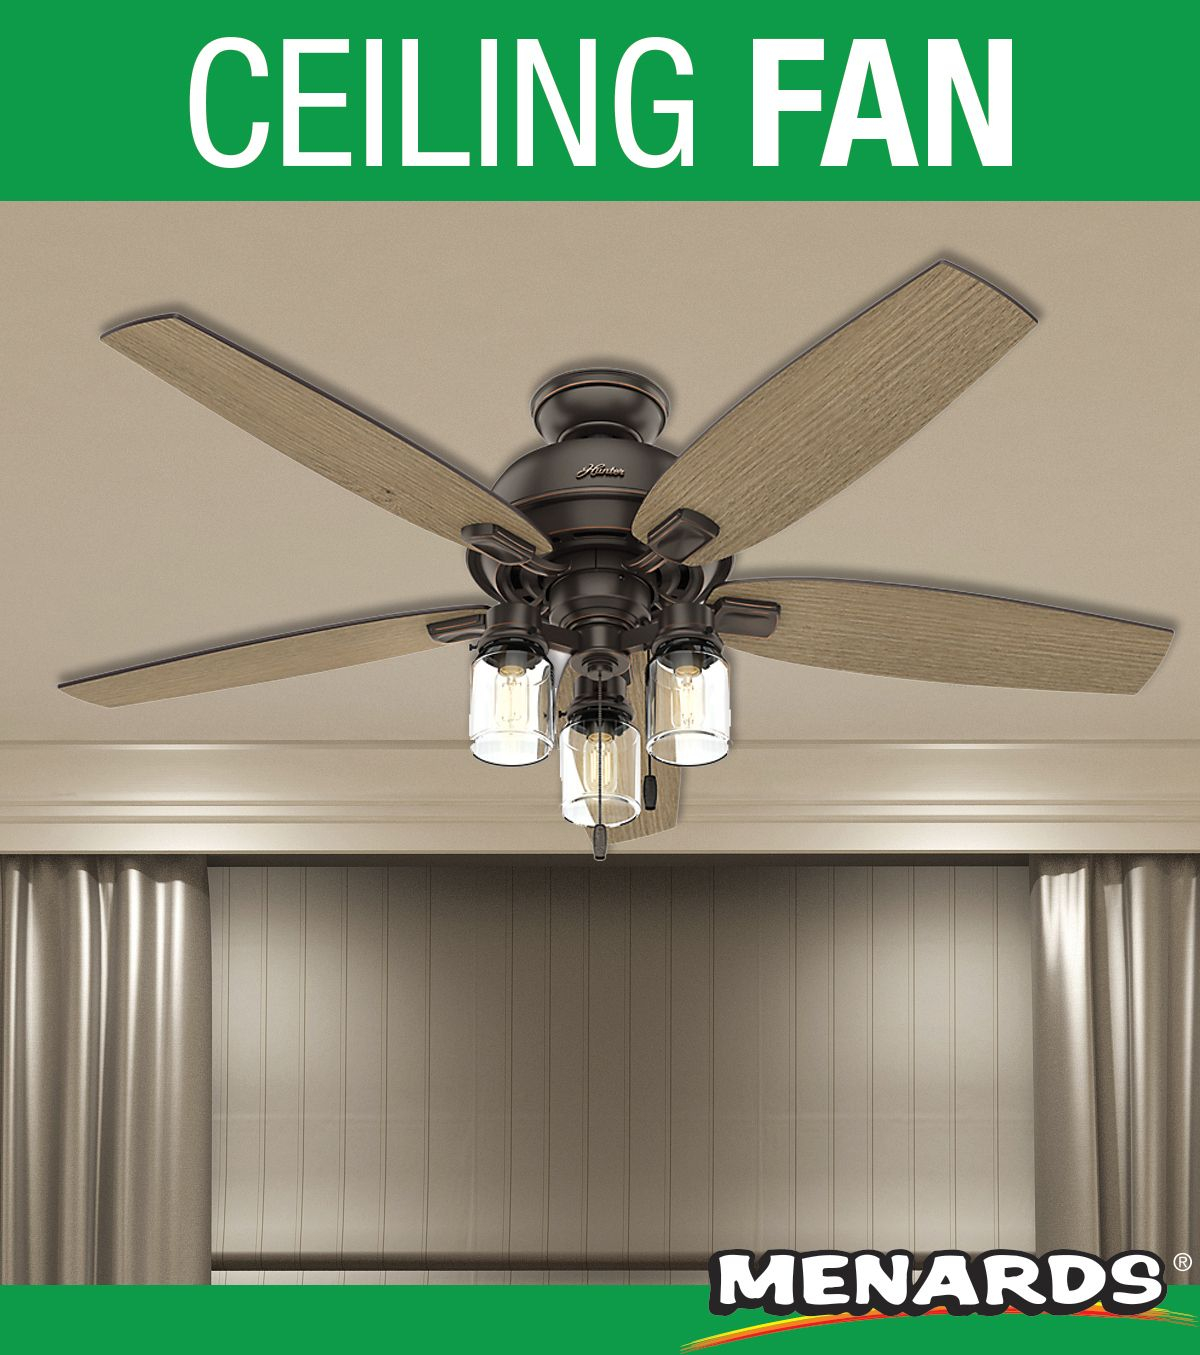 55 Best Fantastic Fans Images In 2020 Ceiling Fan with size 1200 X 1355